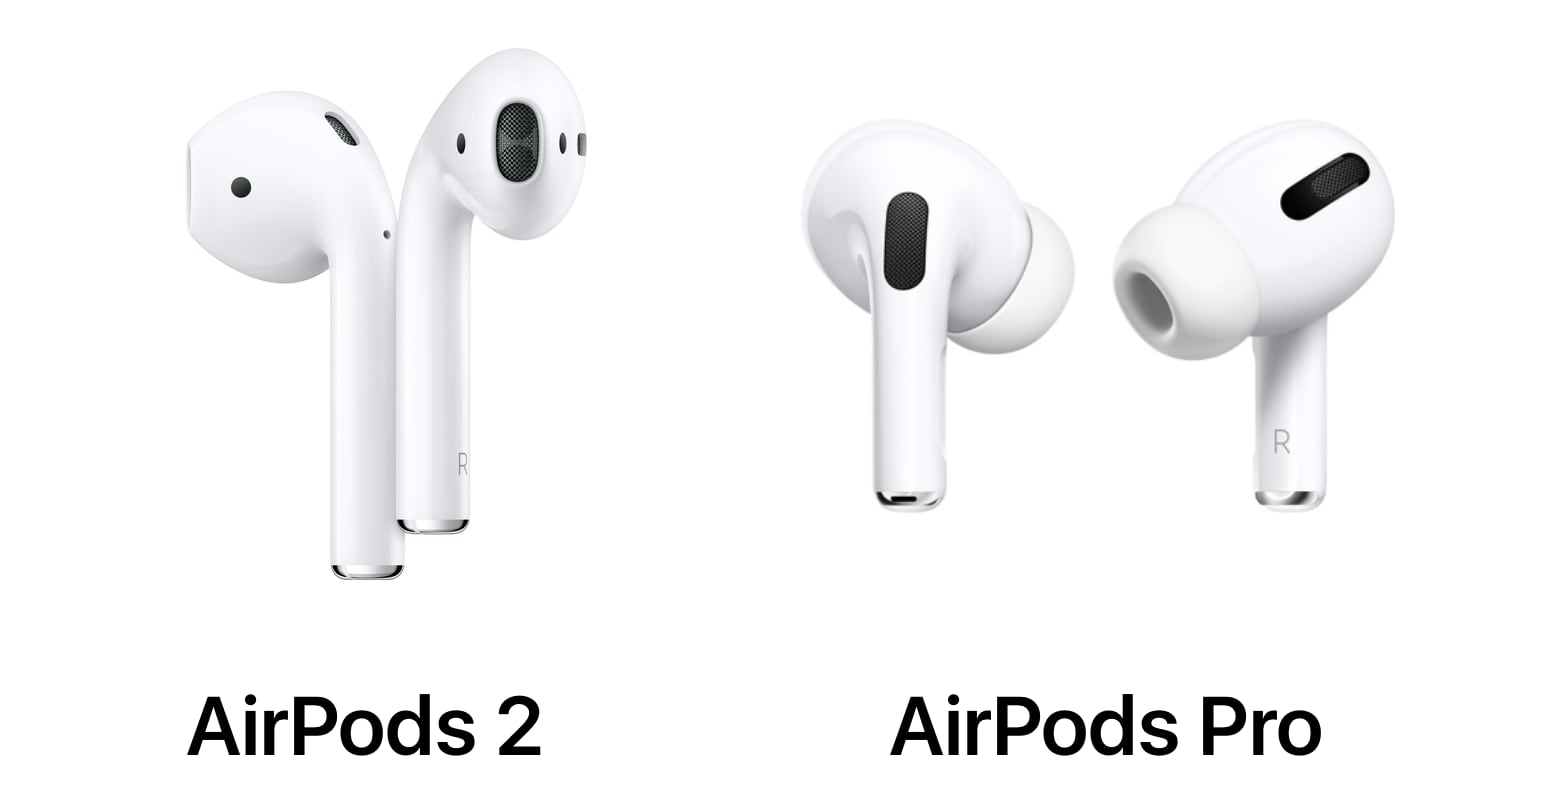 AirPods 2 vs AirPods Pro